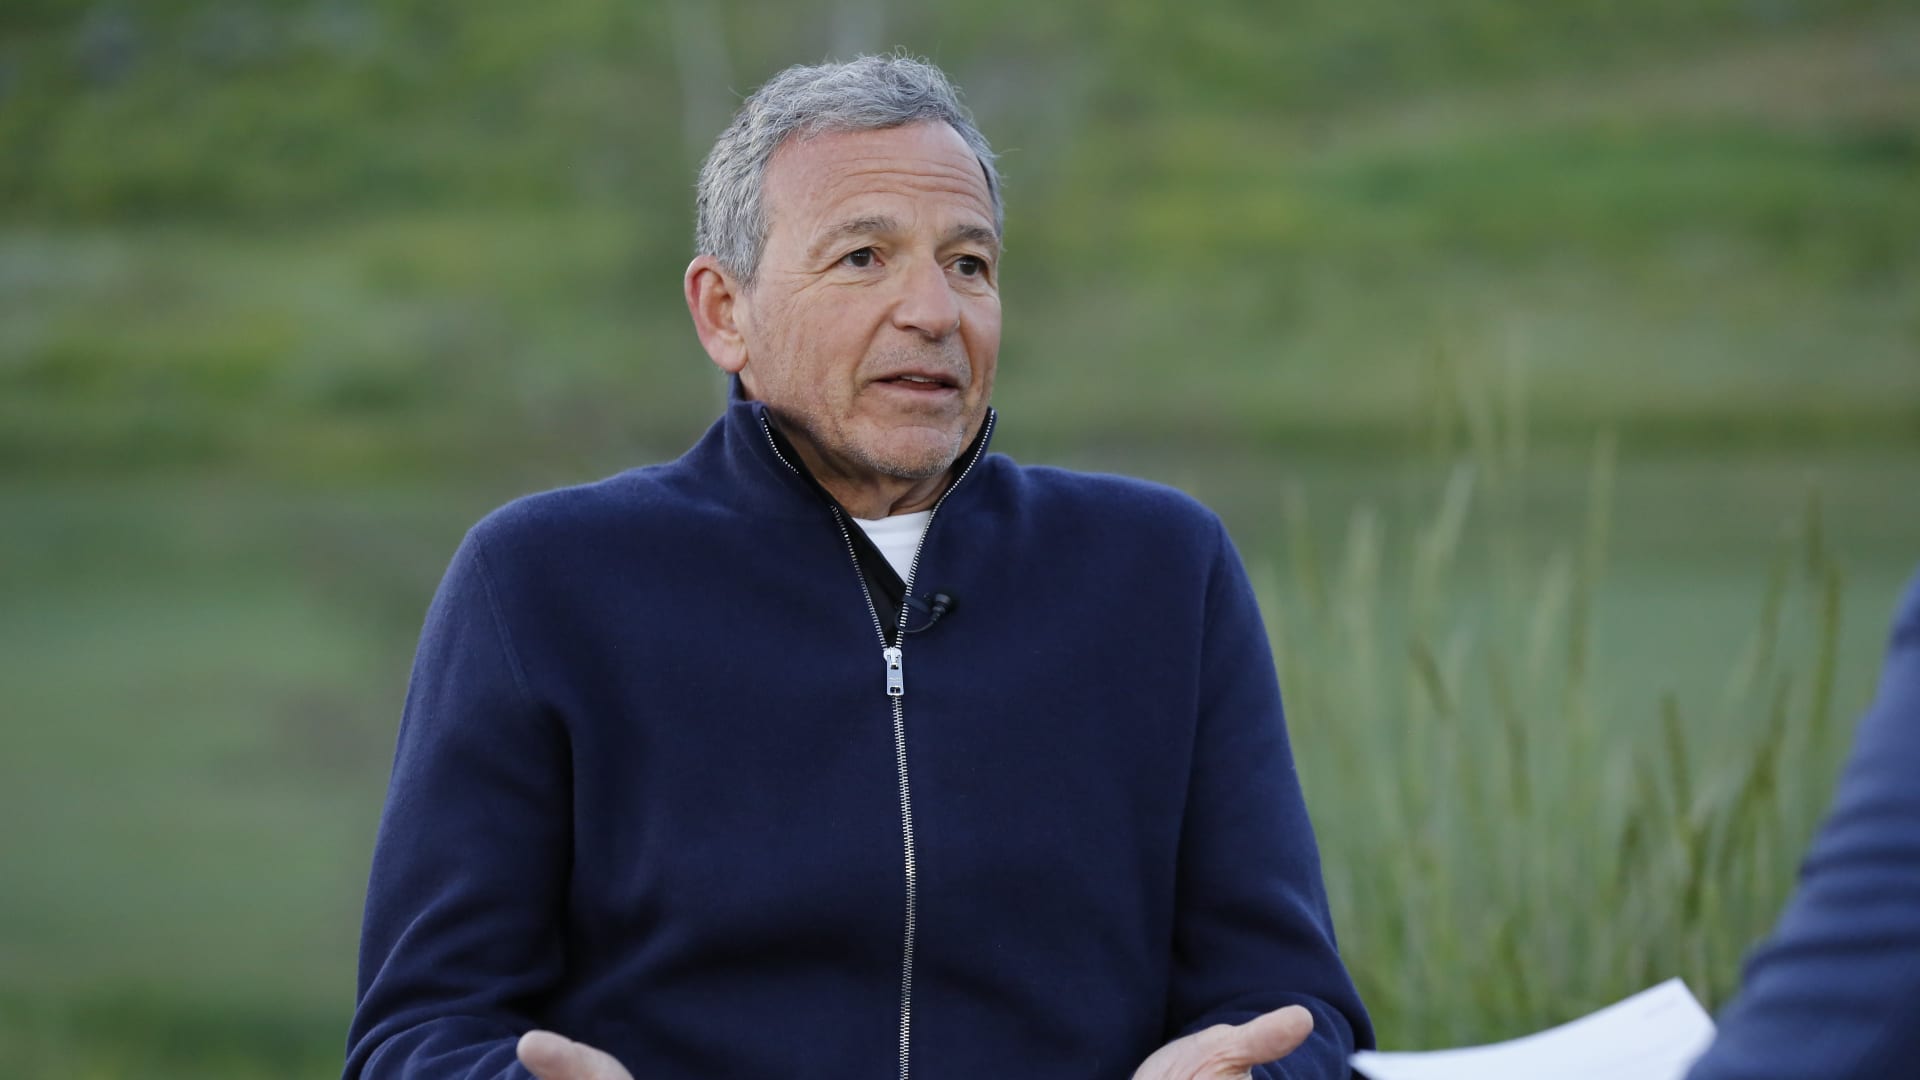 Disney CEO Bob Iger says he wants to build again during town hall